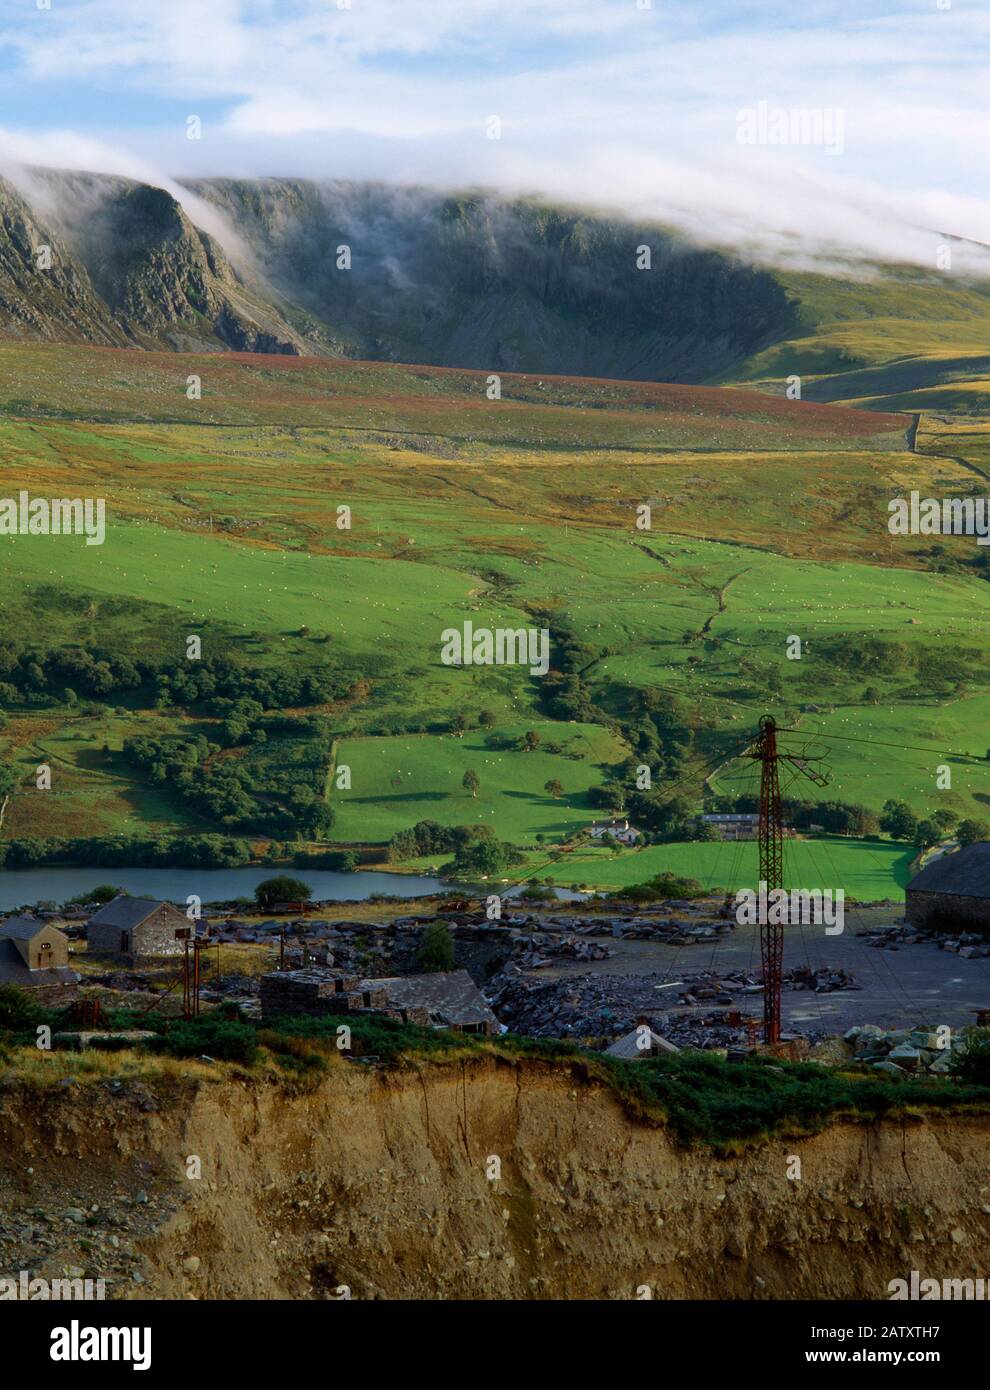 View S across Pen-yr-Orsedd slate quarries to the Nantlle Ridge, Wales, UK, showing the pylon, stays & cable of an aerial ropeway (Blondin crane). Stock Photo